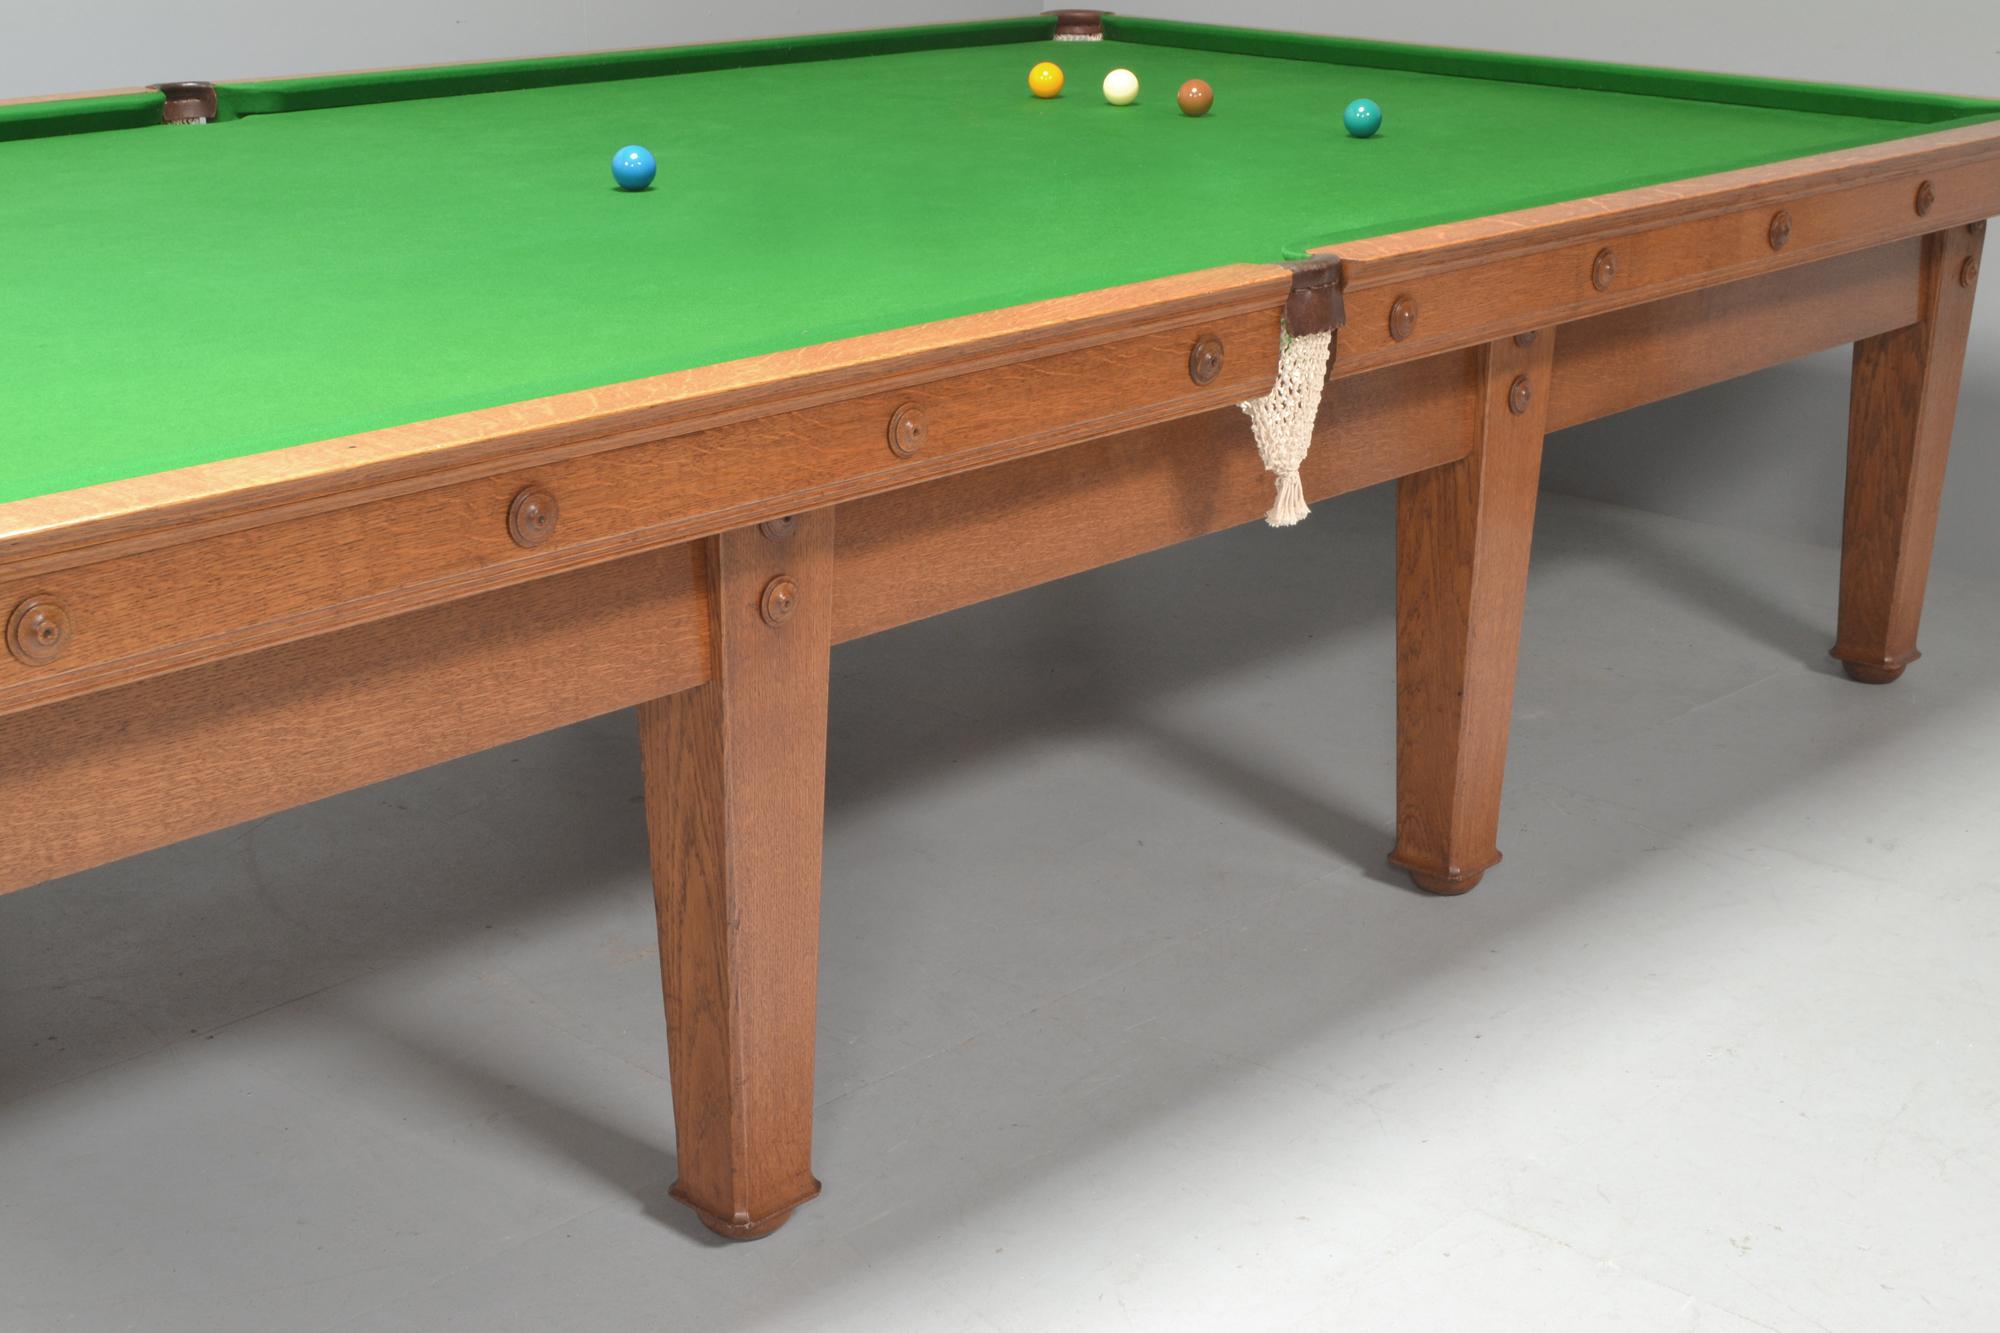 full size pool table dimensions